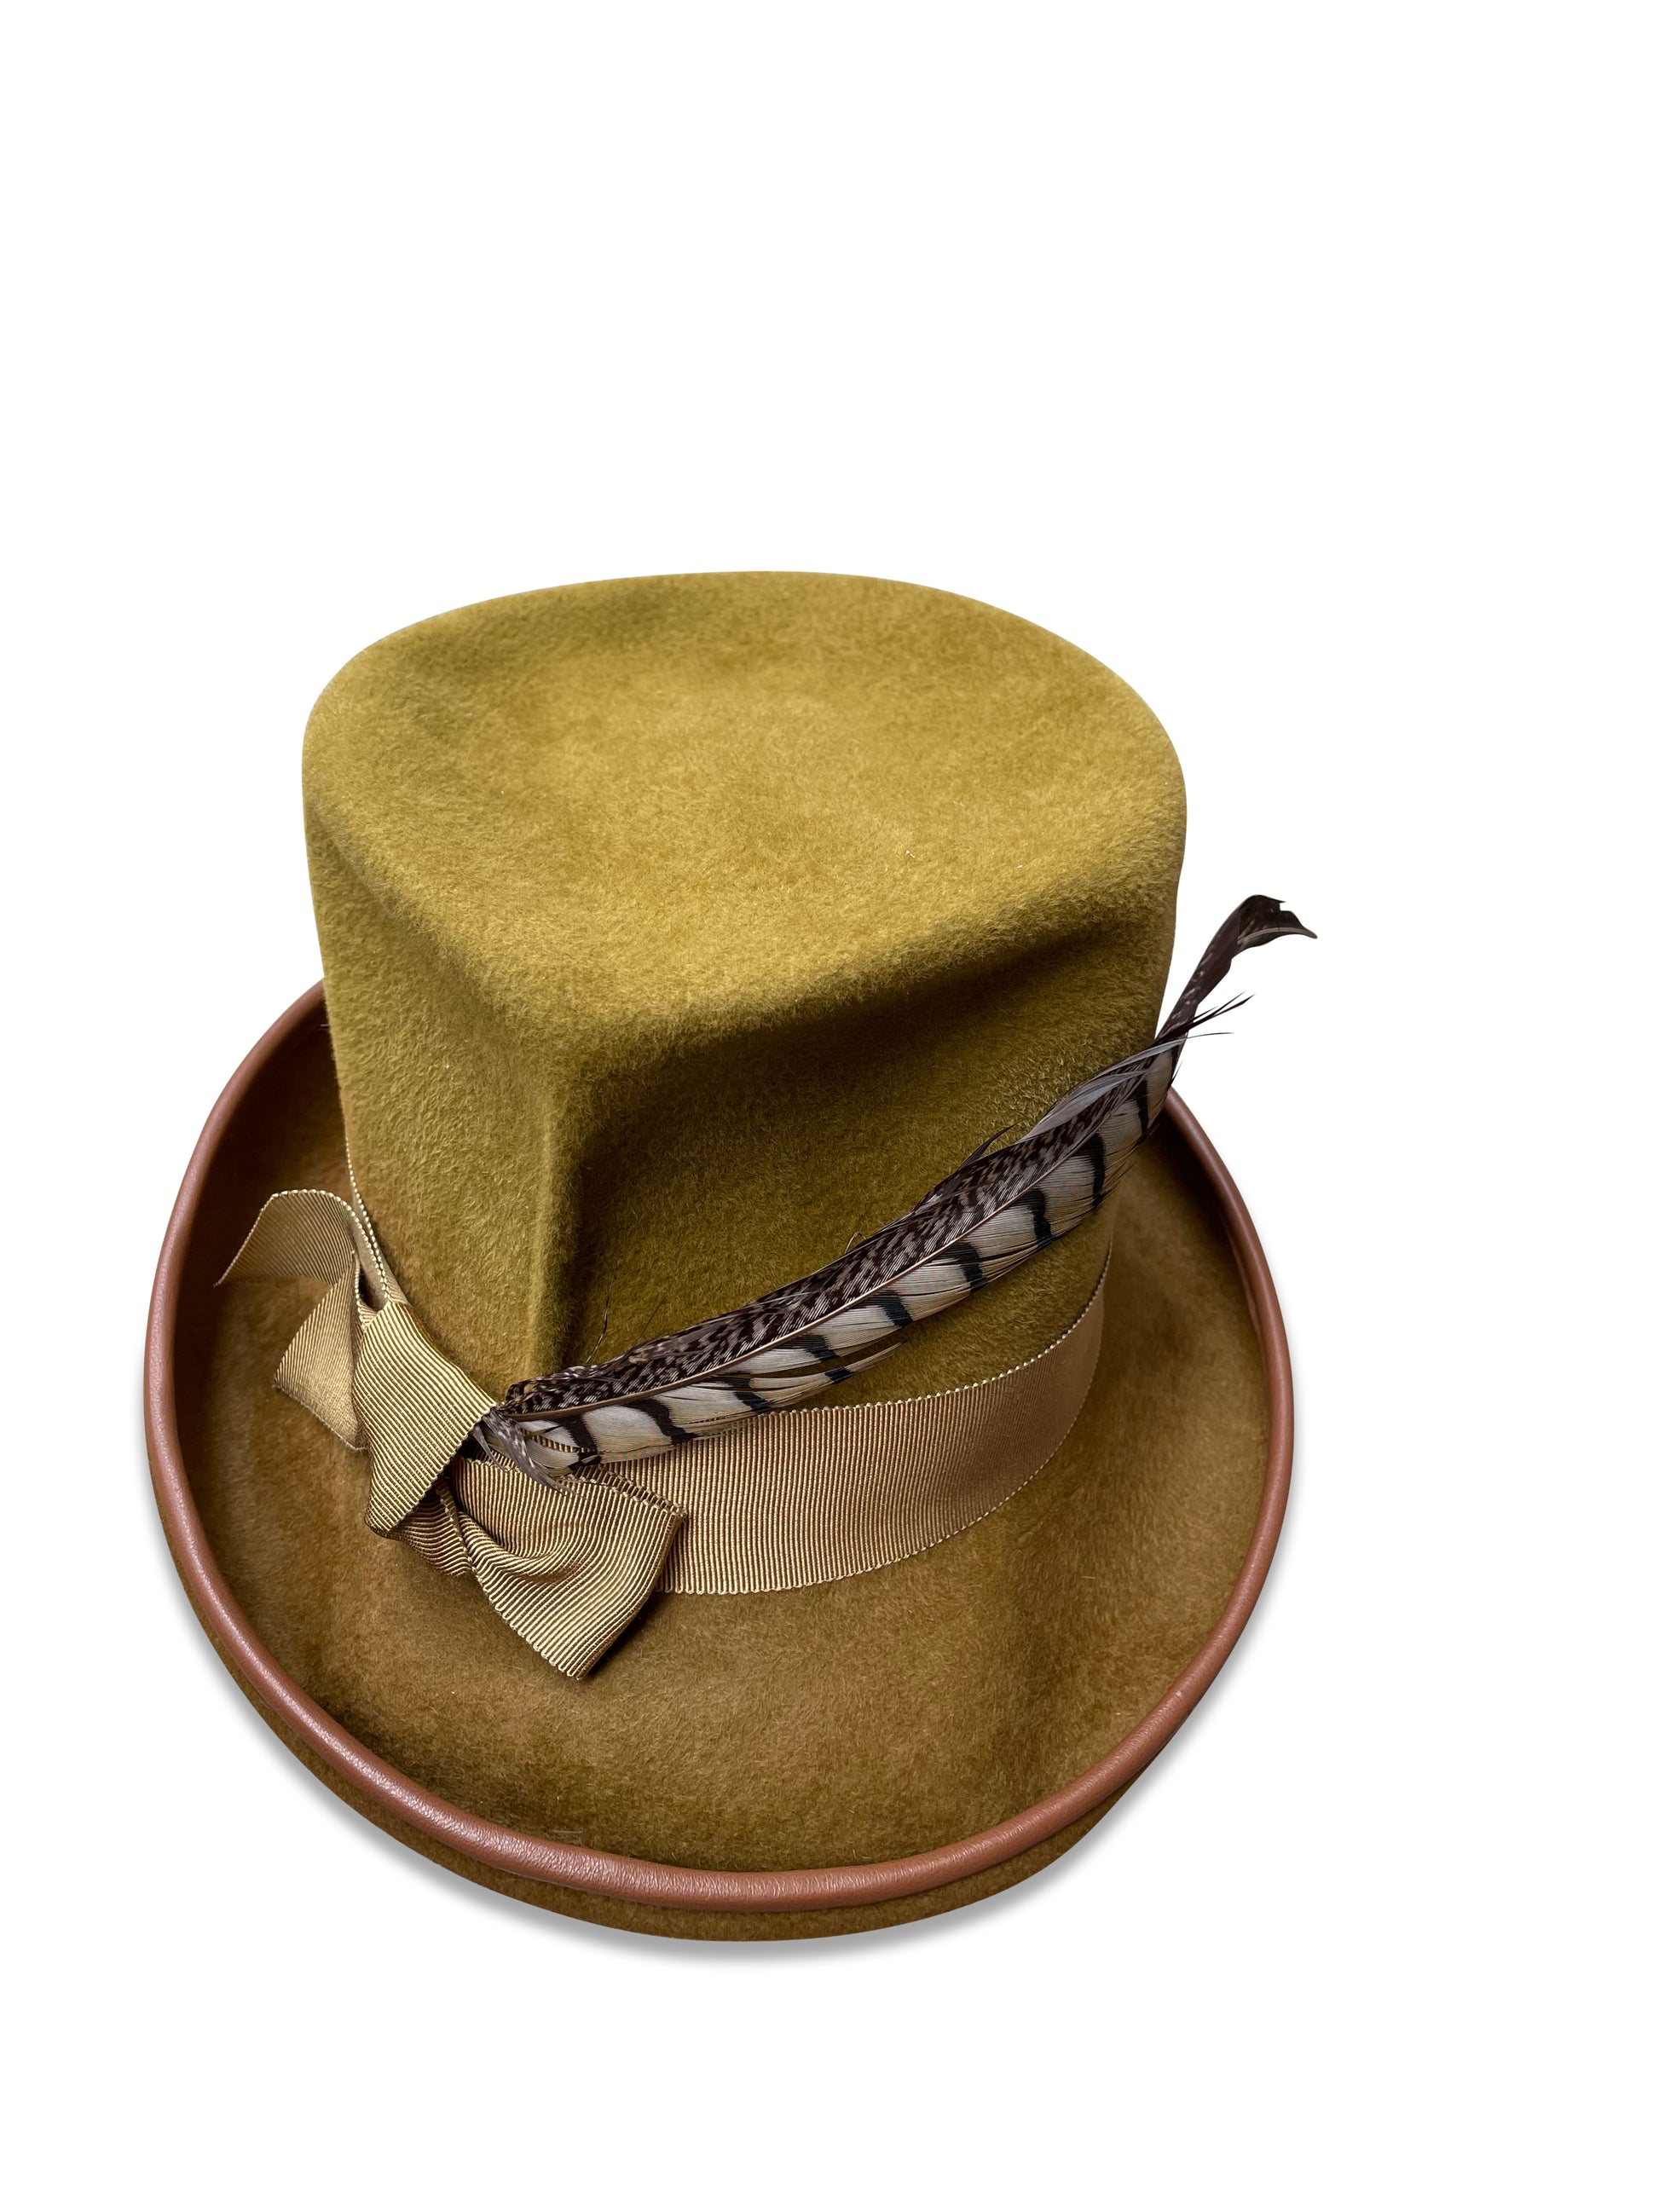 Victorian-style gold felt top hat with grosgrain ribbon trim and pheasant tail feather